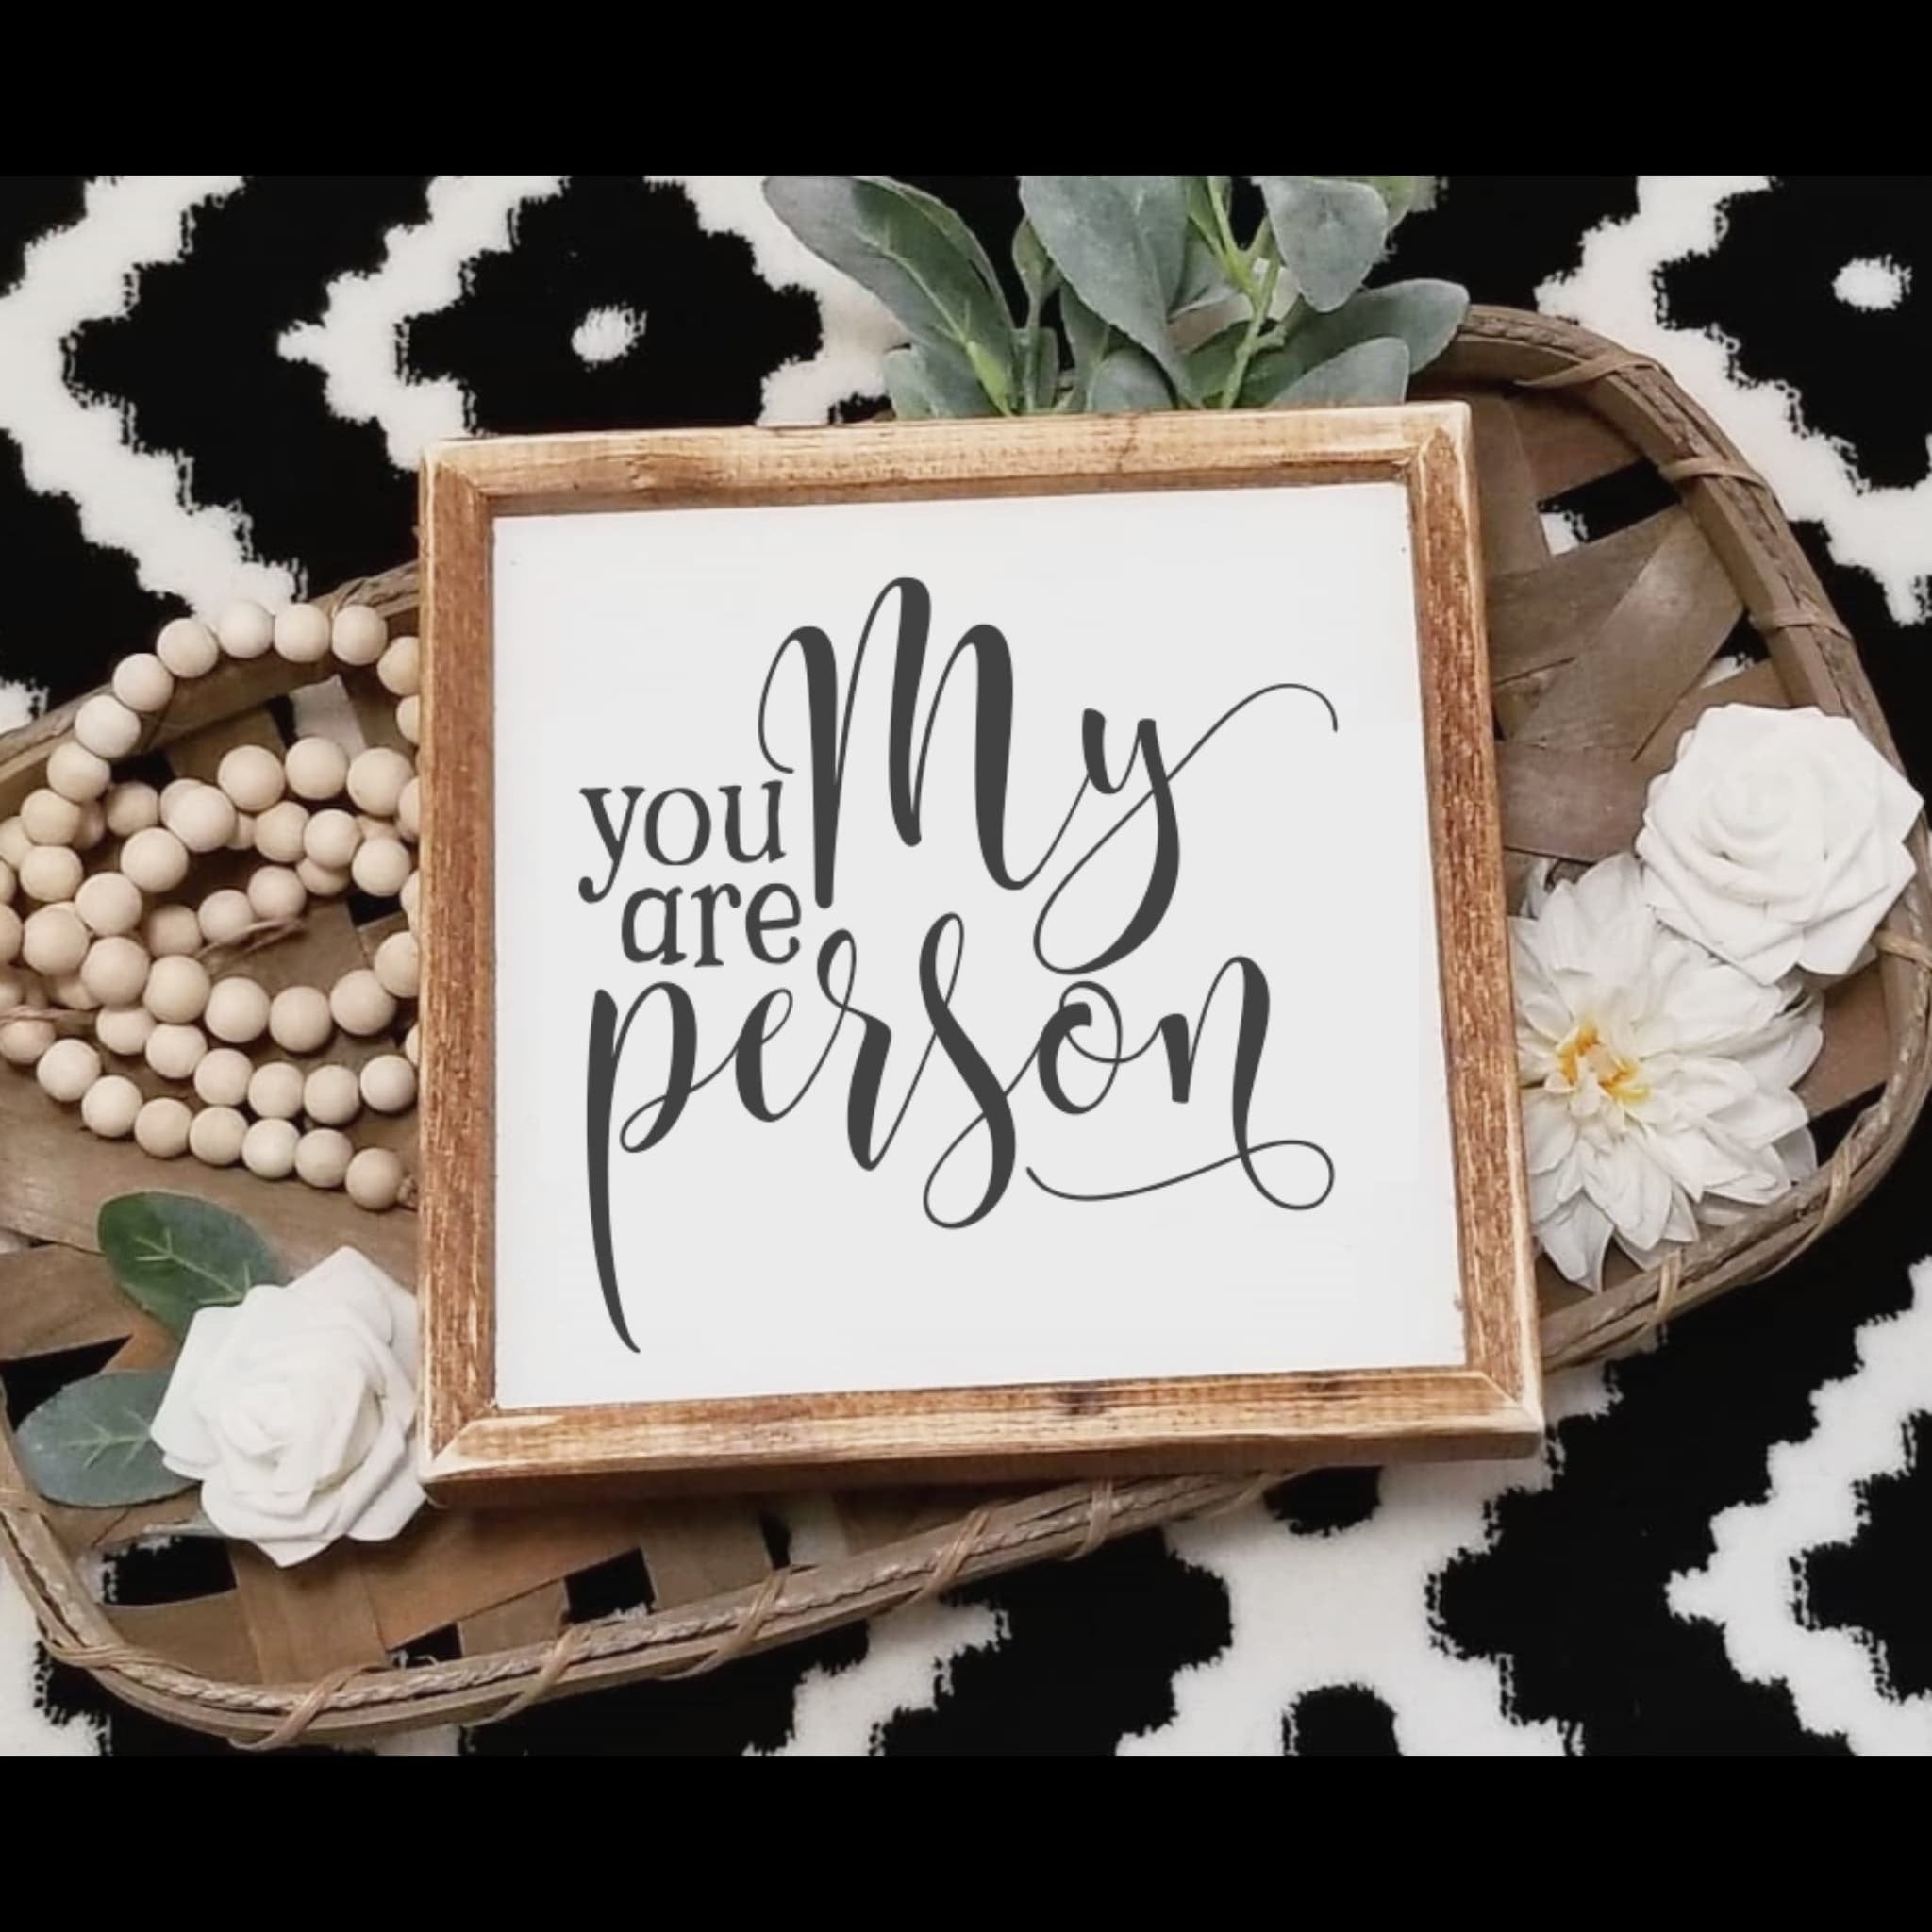 You are my person sign, you are my person, farmhouse decor, grey's anatomy quote, you're my person, master bedroom decor, over the bed sign